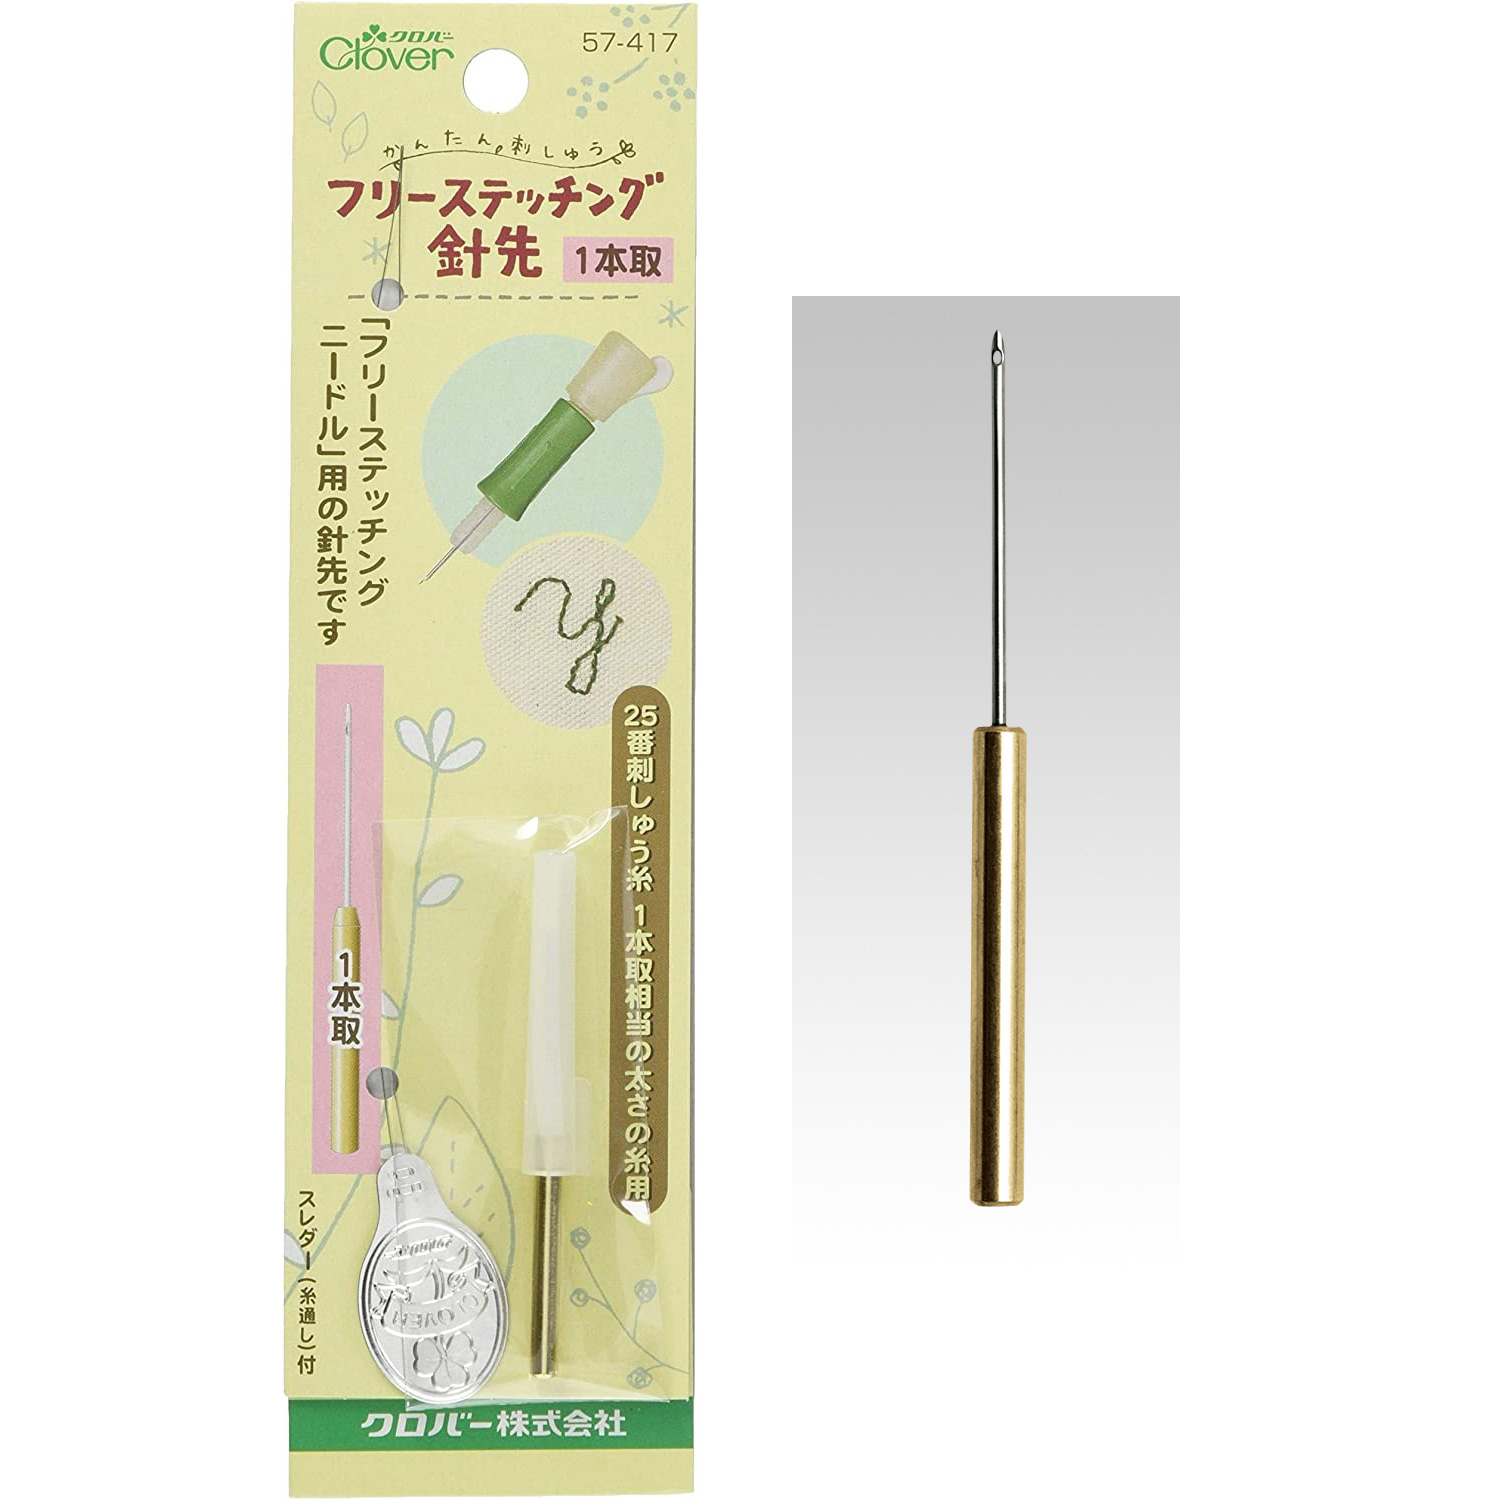 CL57-417 Easy Embroidery Stitching Needle Refills"", 1pcs (pcs)